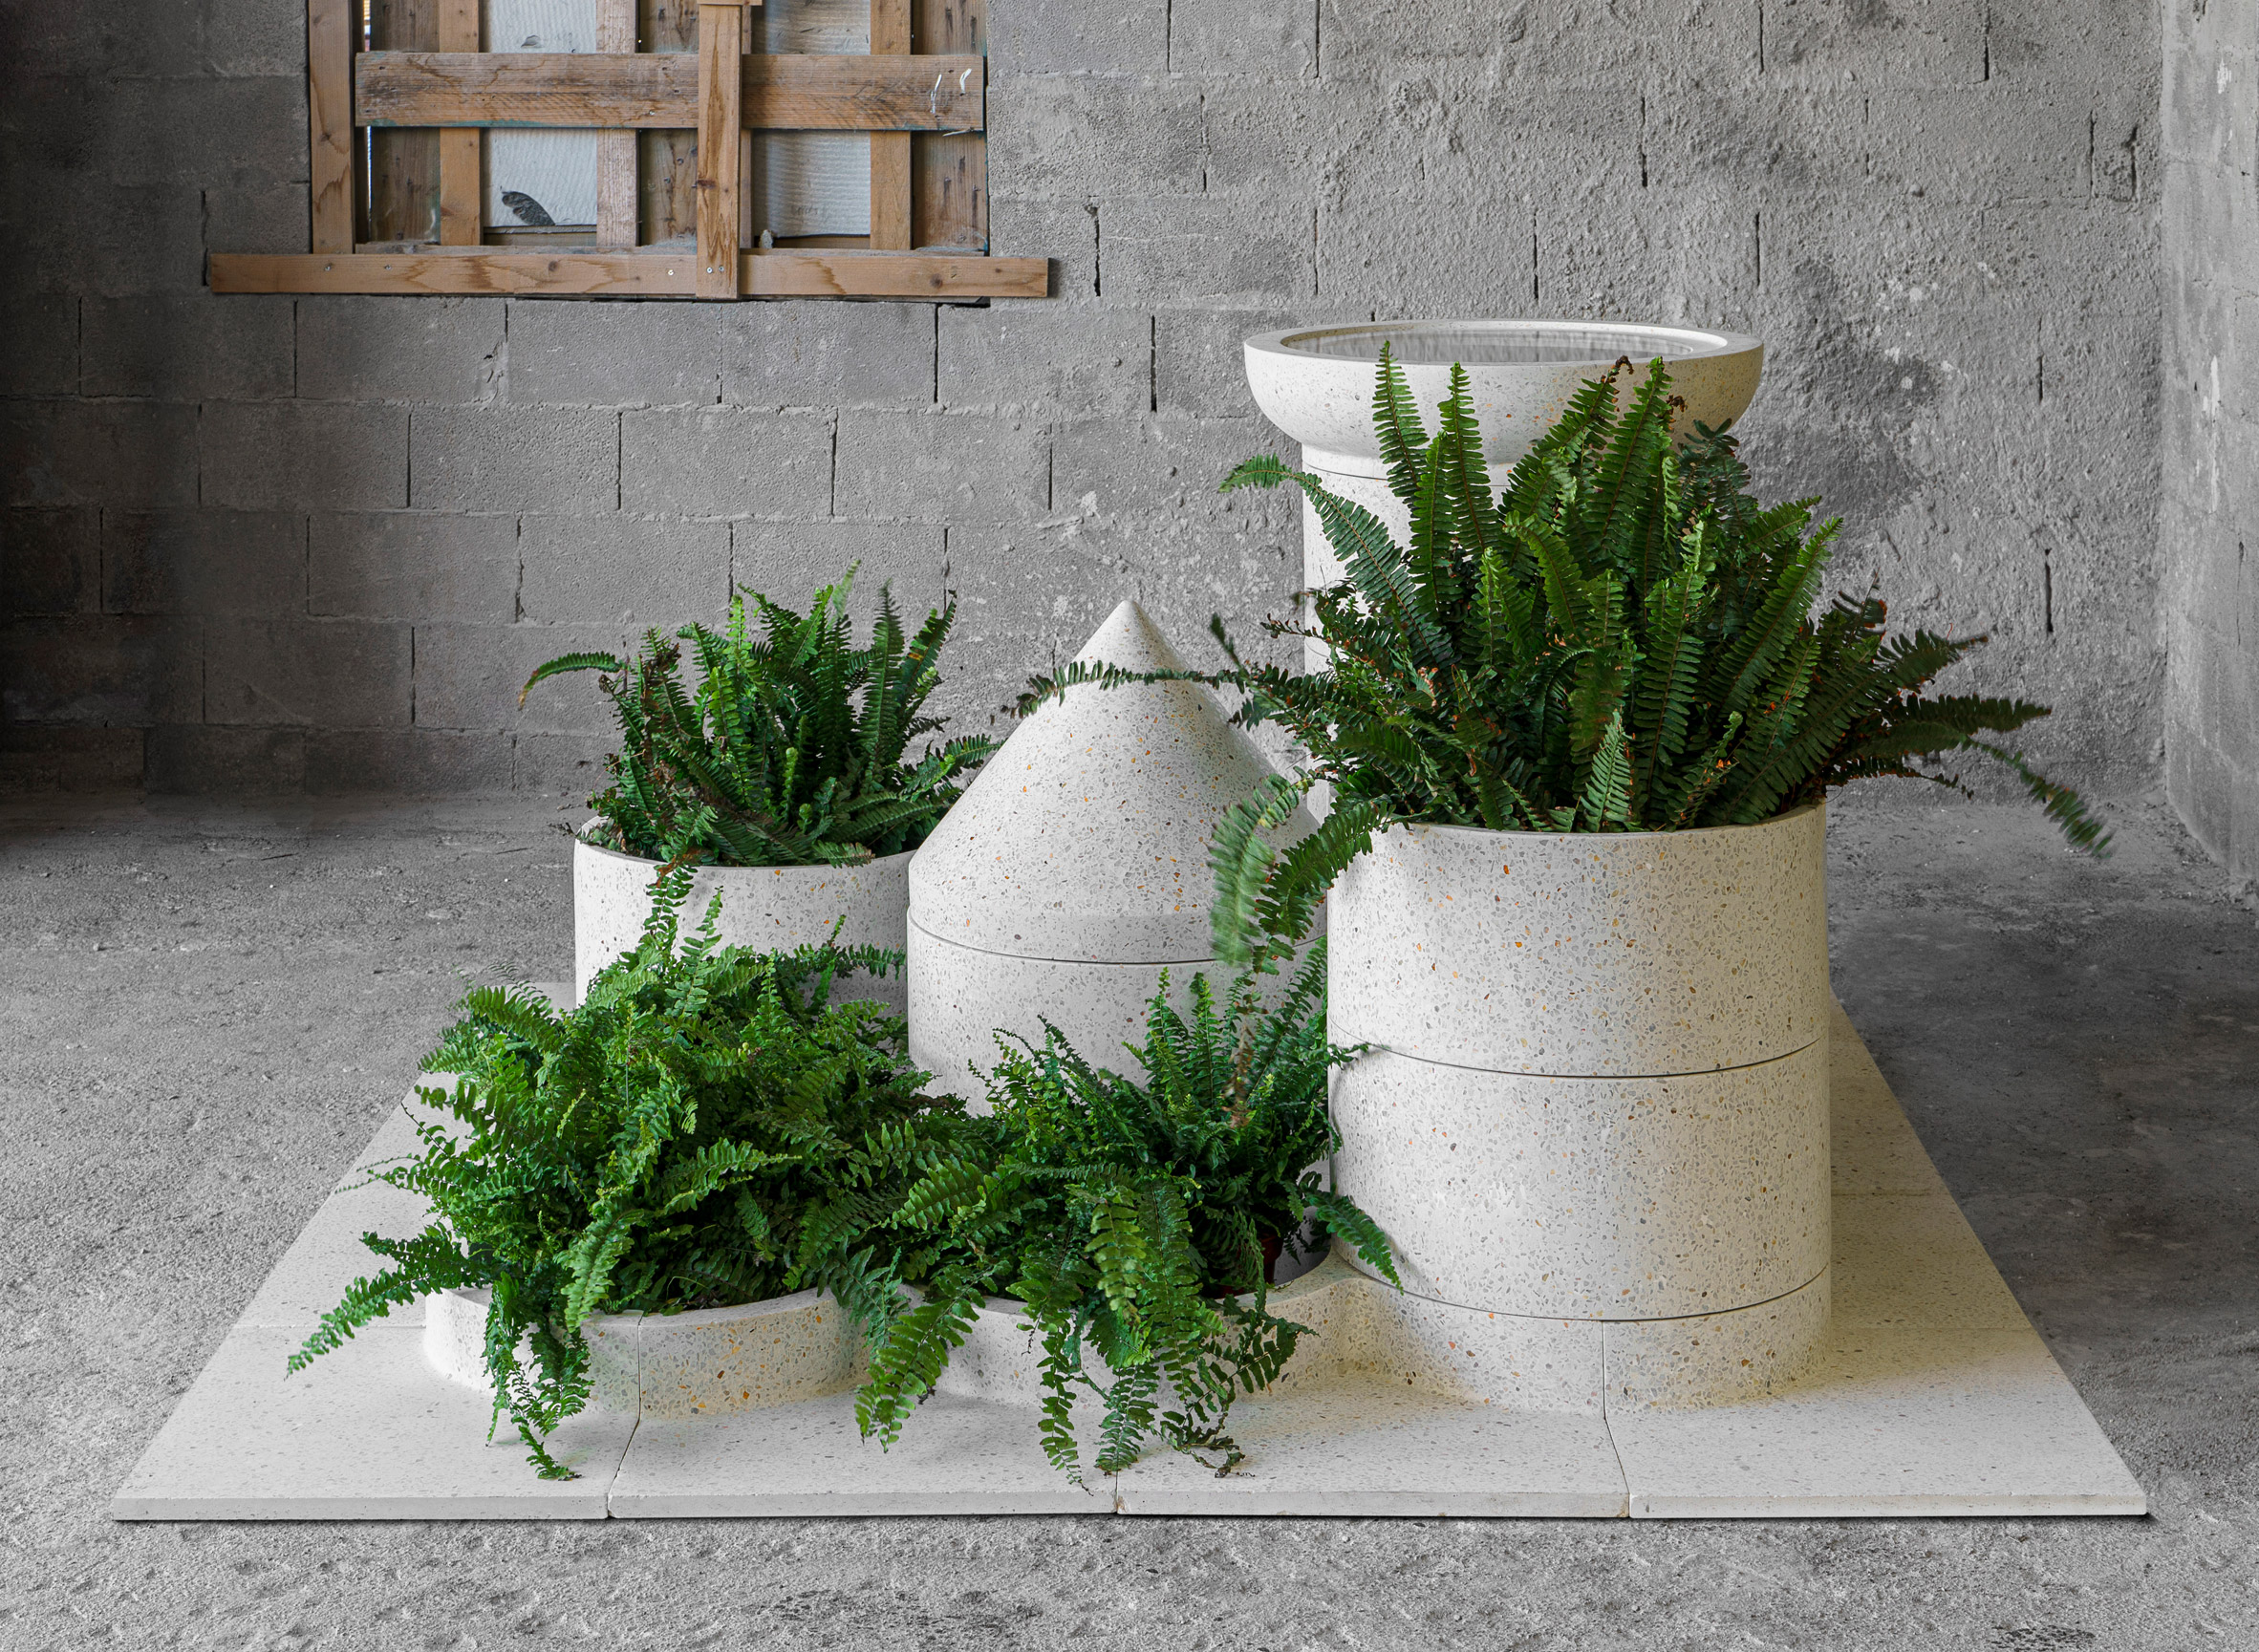 White ceramic pots filled with plants